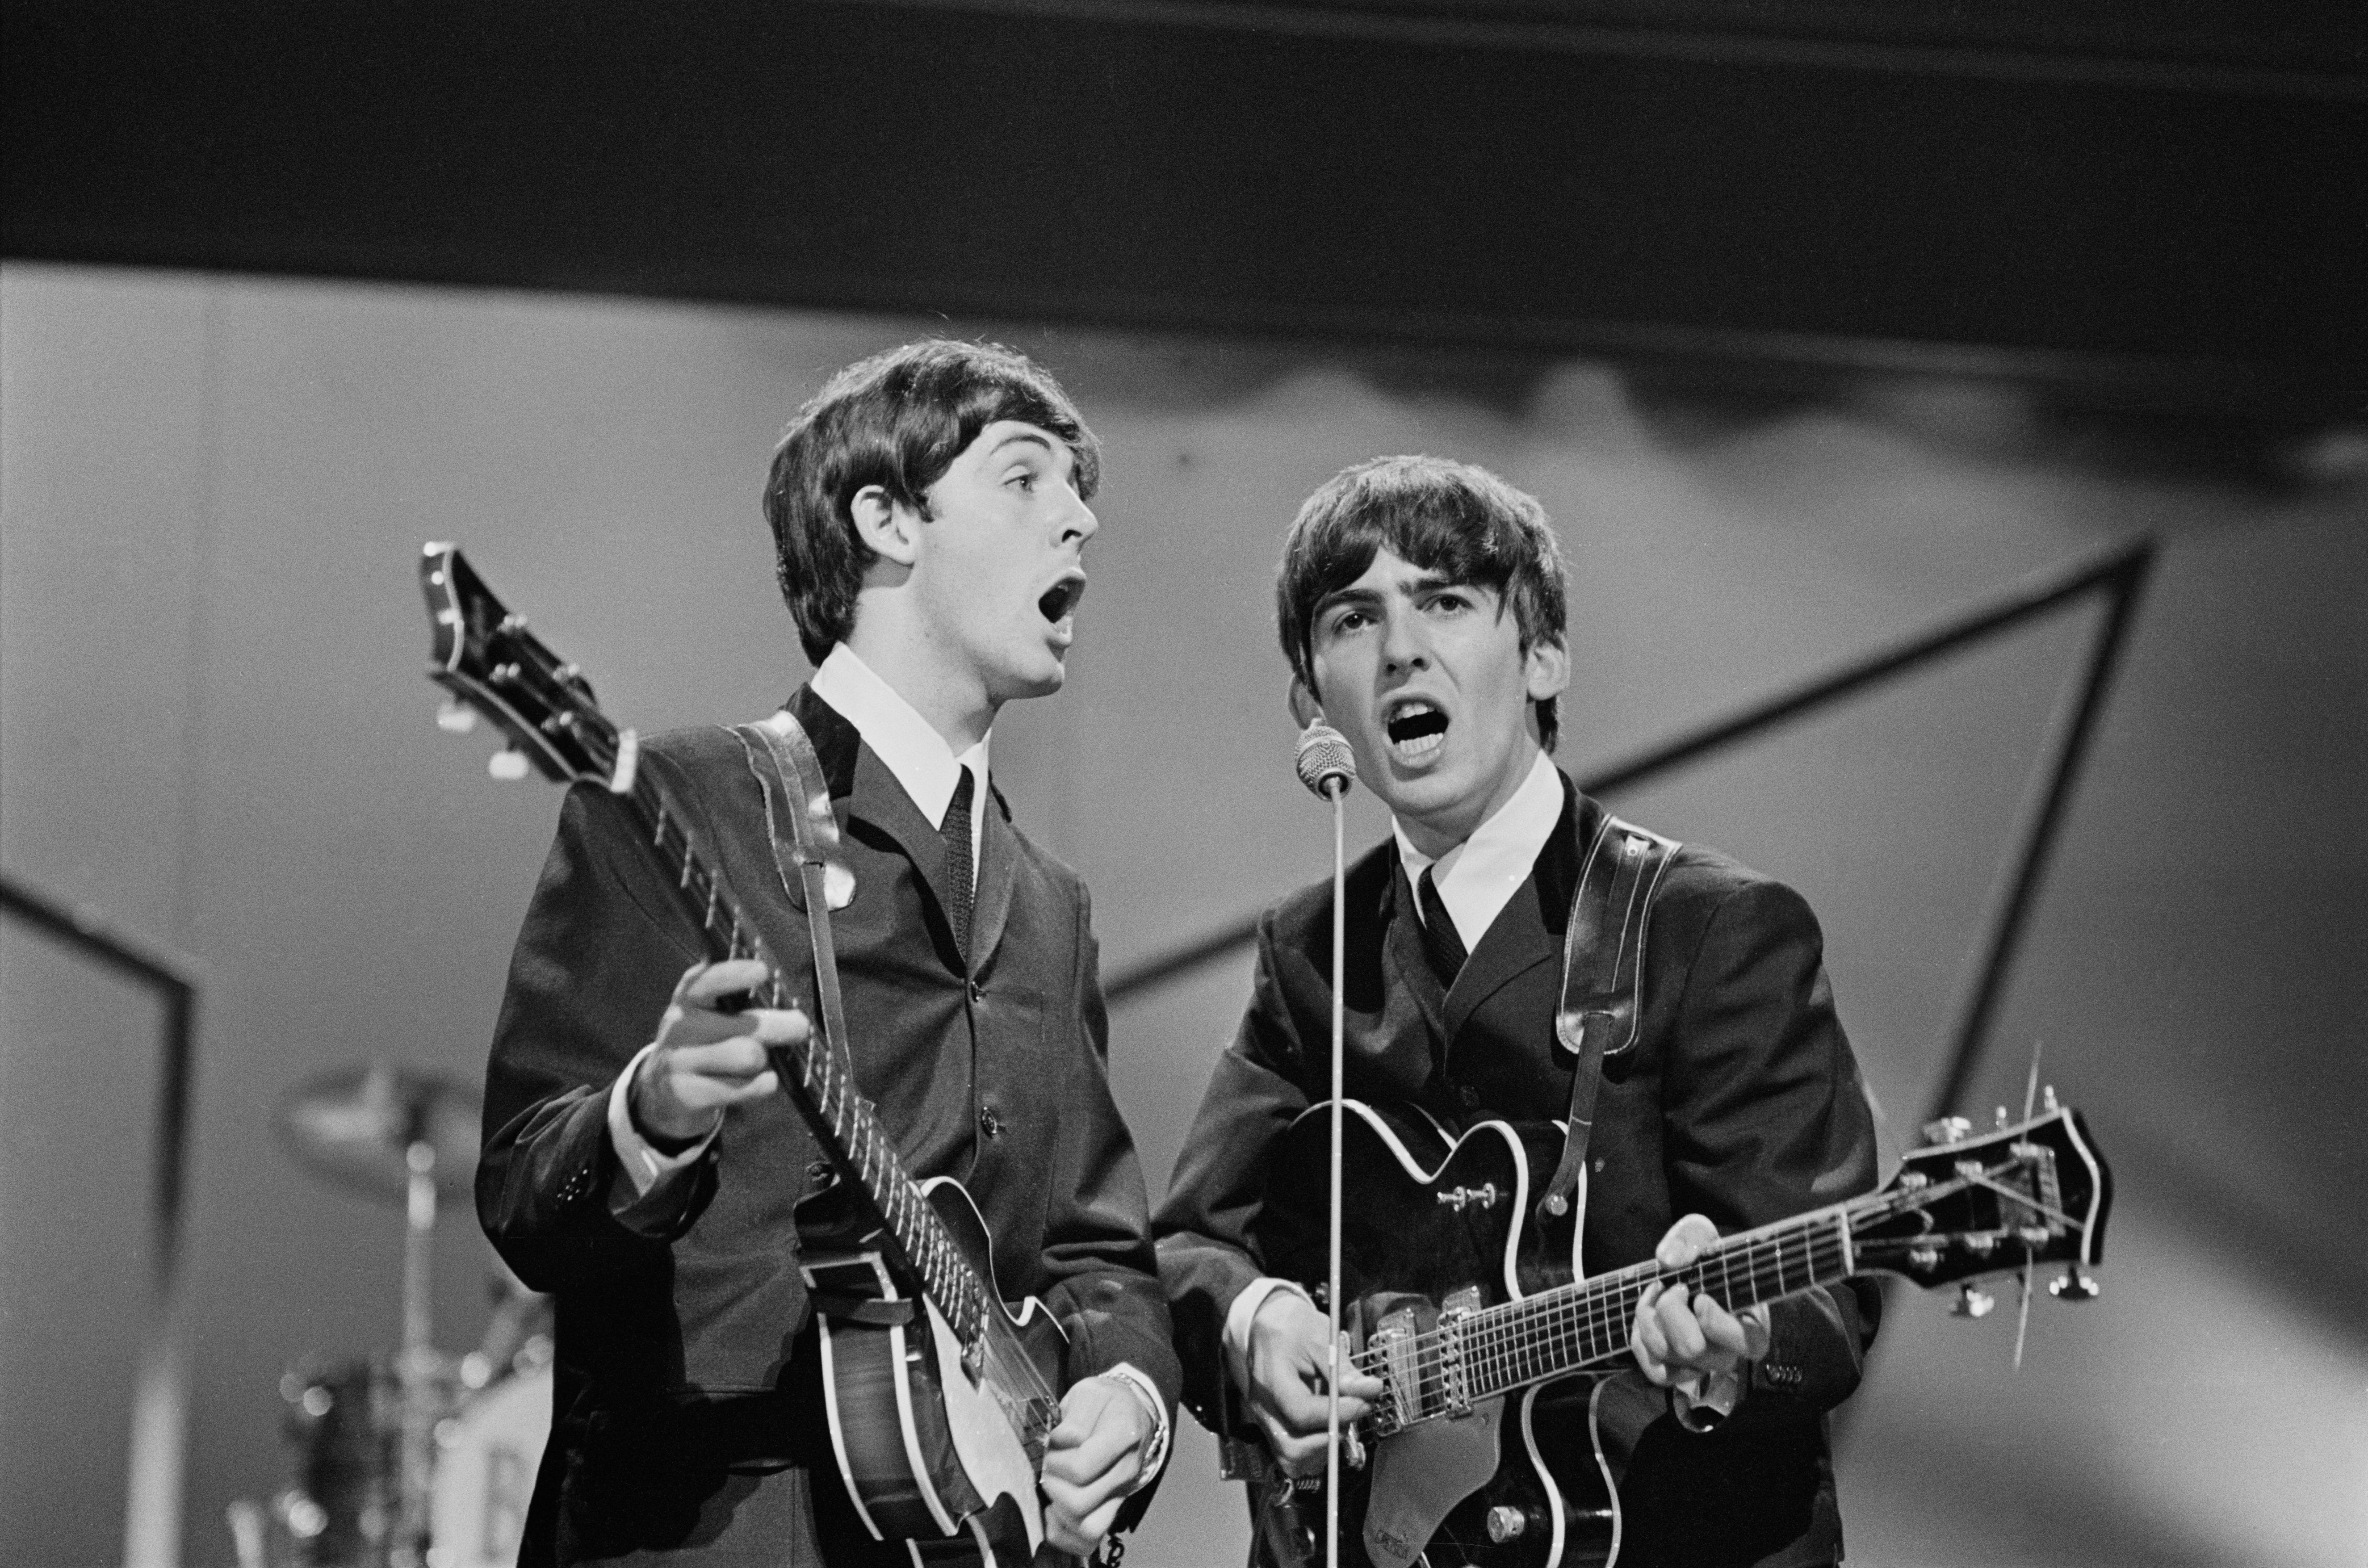 Paul McCartney and George Harrison on stage at the London Palladium on 13 October 1963